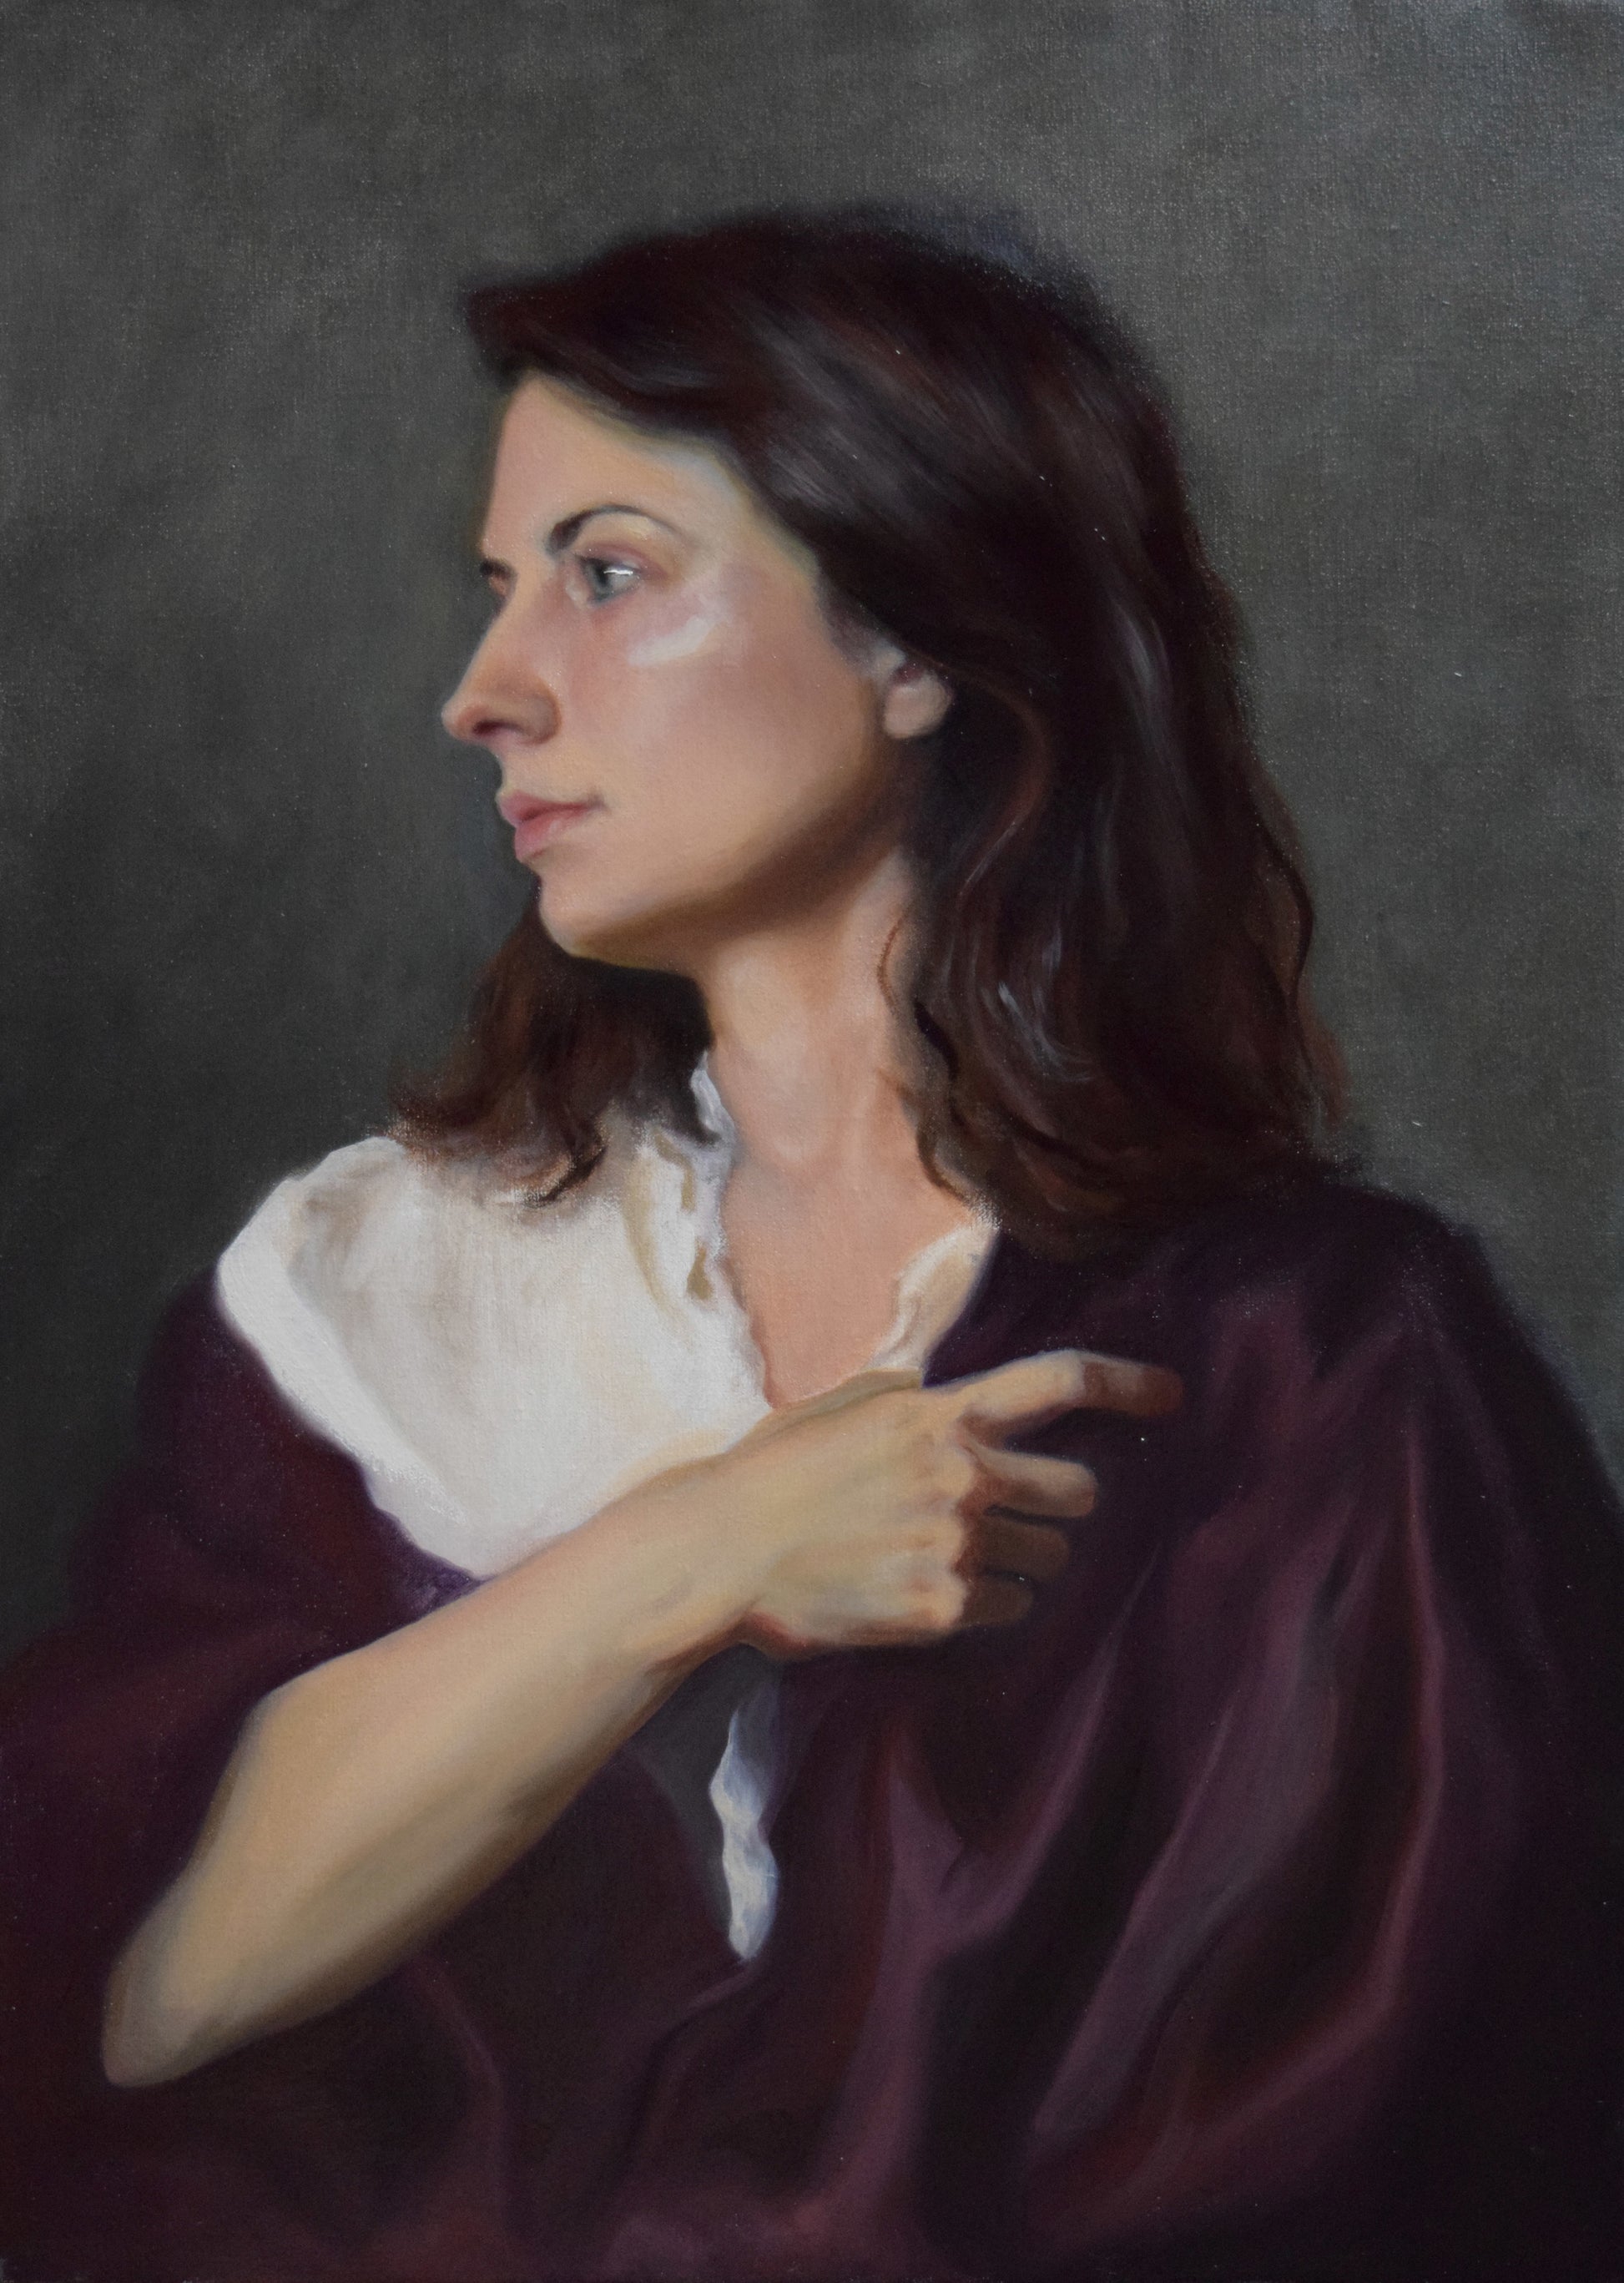 Oil painting of a white woman with brown hair in profile. She is wearing a white shirt and purple shawl that she grips in her hand across her chest.